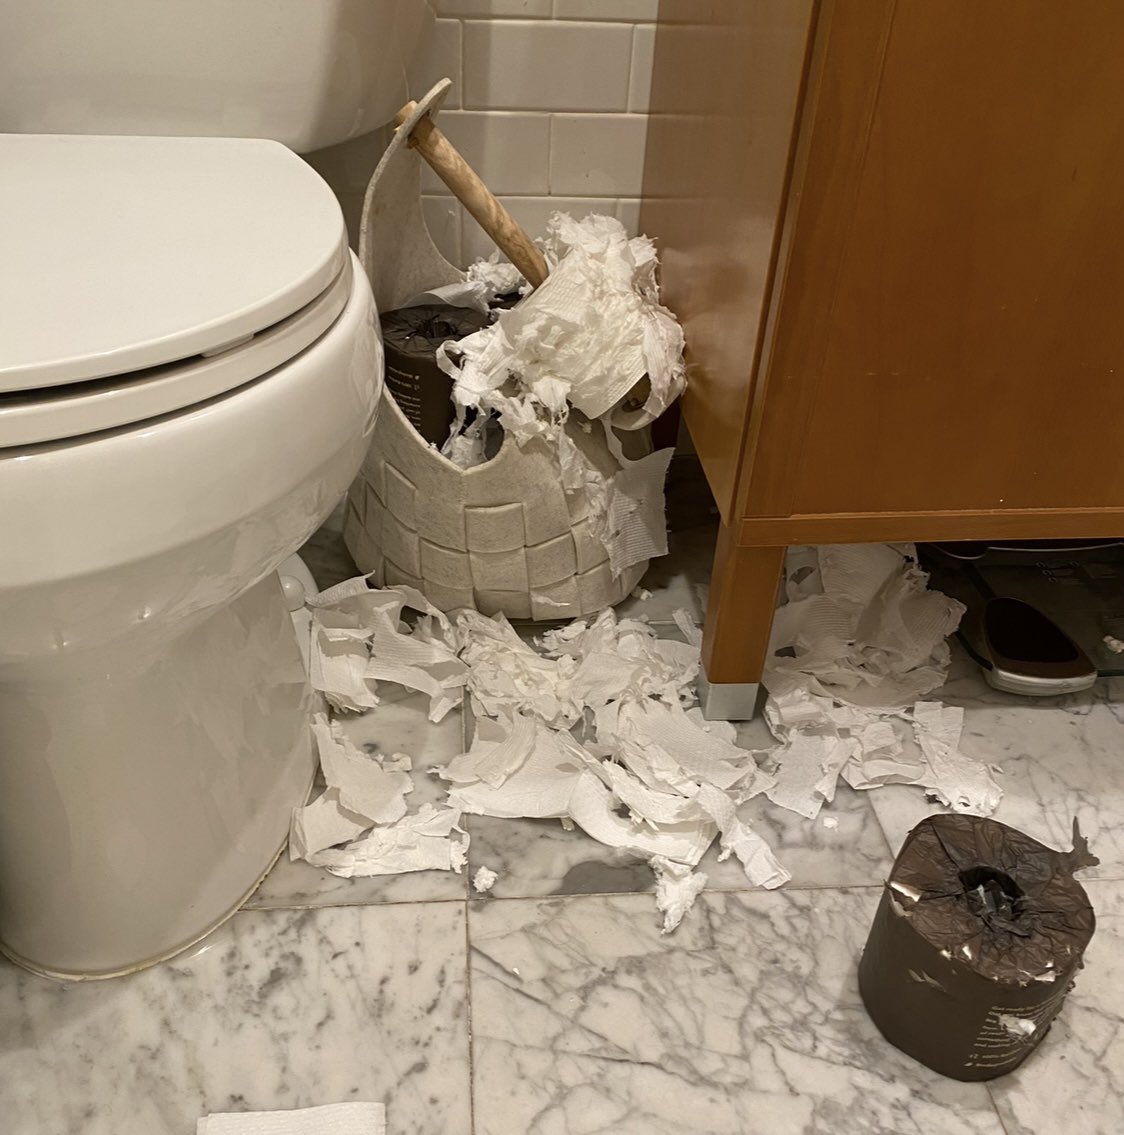 My cats and I doing our best to be accommodating to our house guests. Would you like your toilet paper regular or shredded?